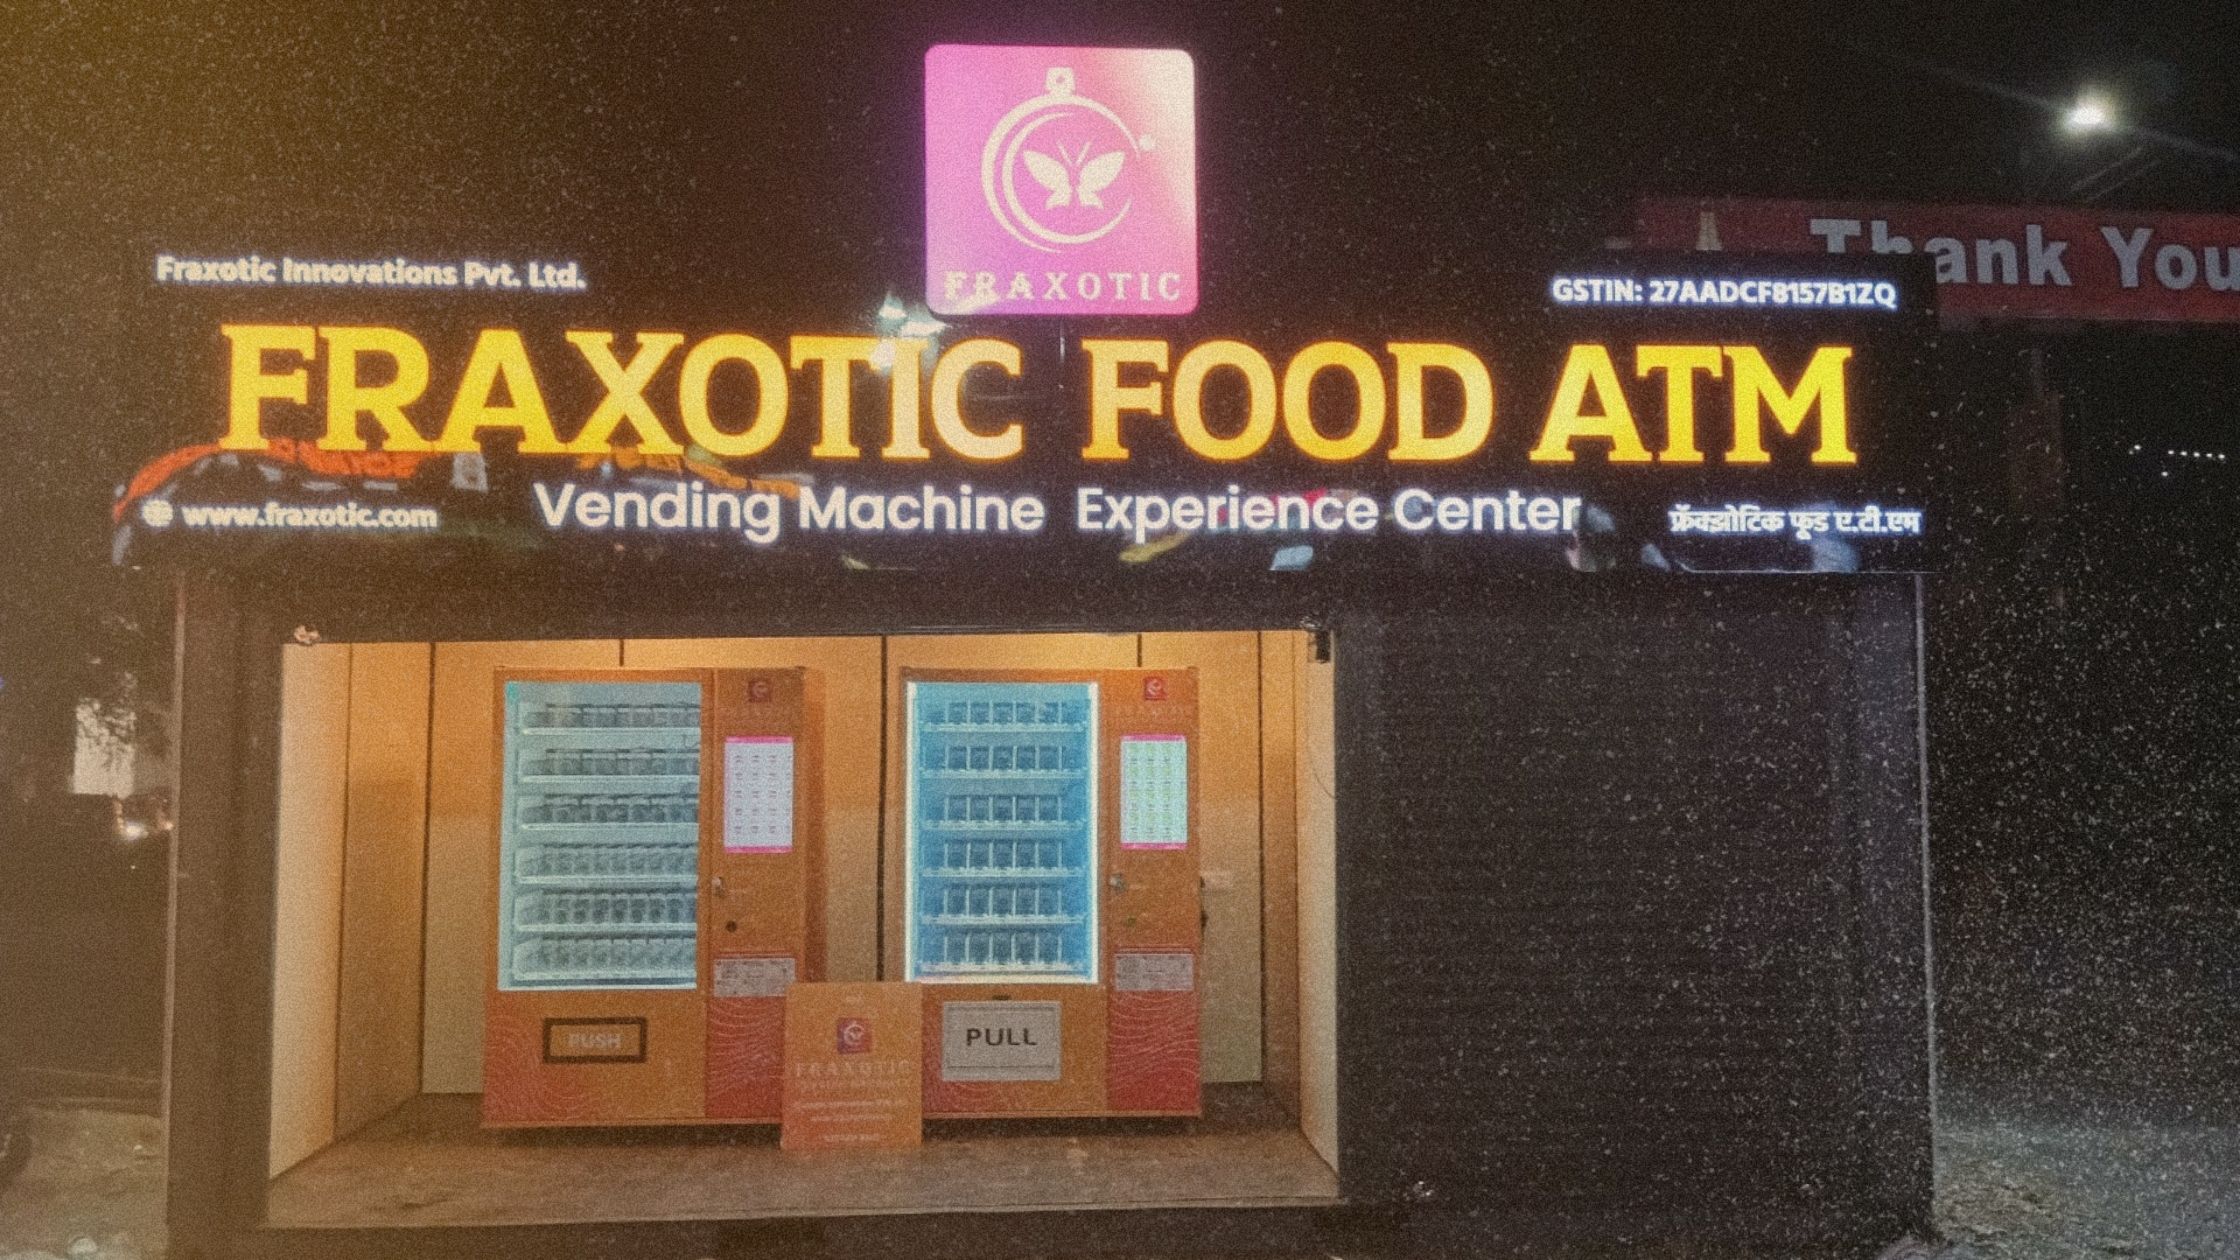 Fraxotic Food ATM Vending Machine Experience Center